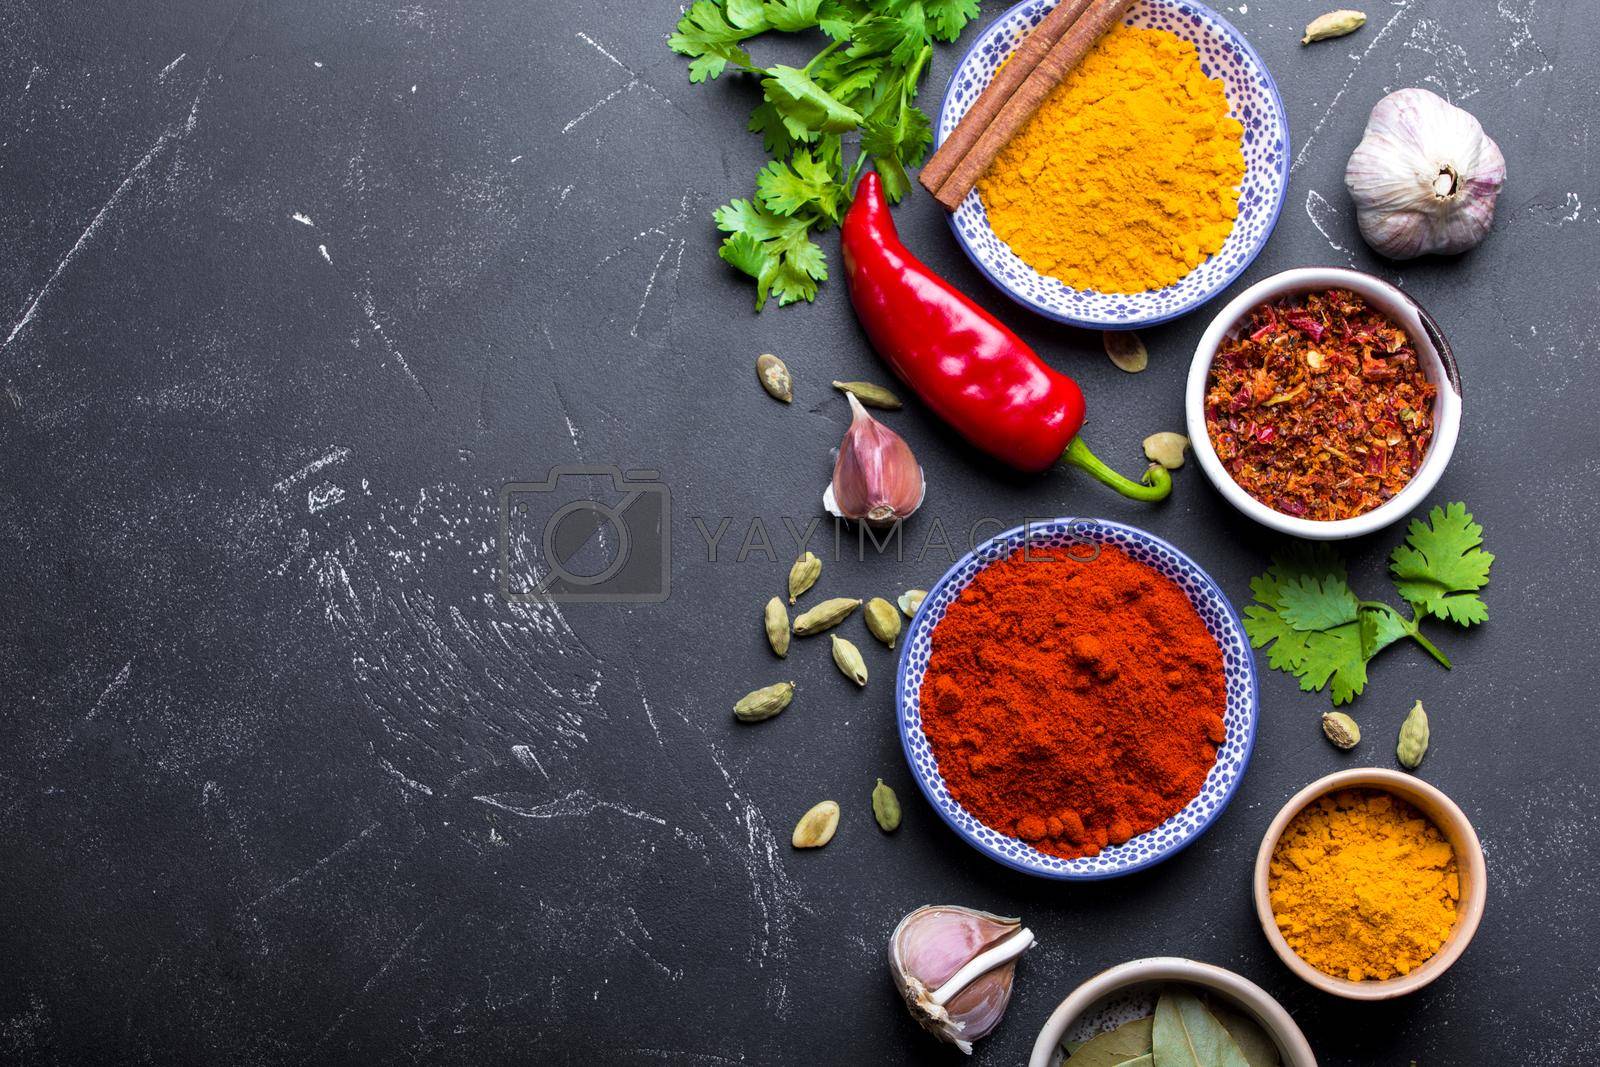 Set of Indian food cooking ingredients. Traditional Indian assorted spices and herbs. Curry, turmeric, cardamom, garlic, pepper, cilantro, cinnamon. Preparing exotic meal. Top view, close up